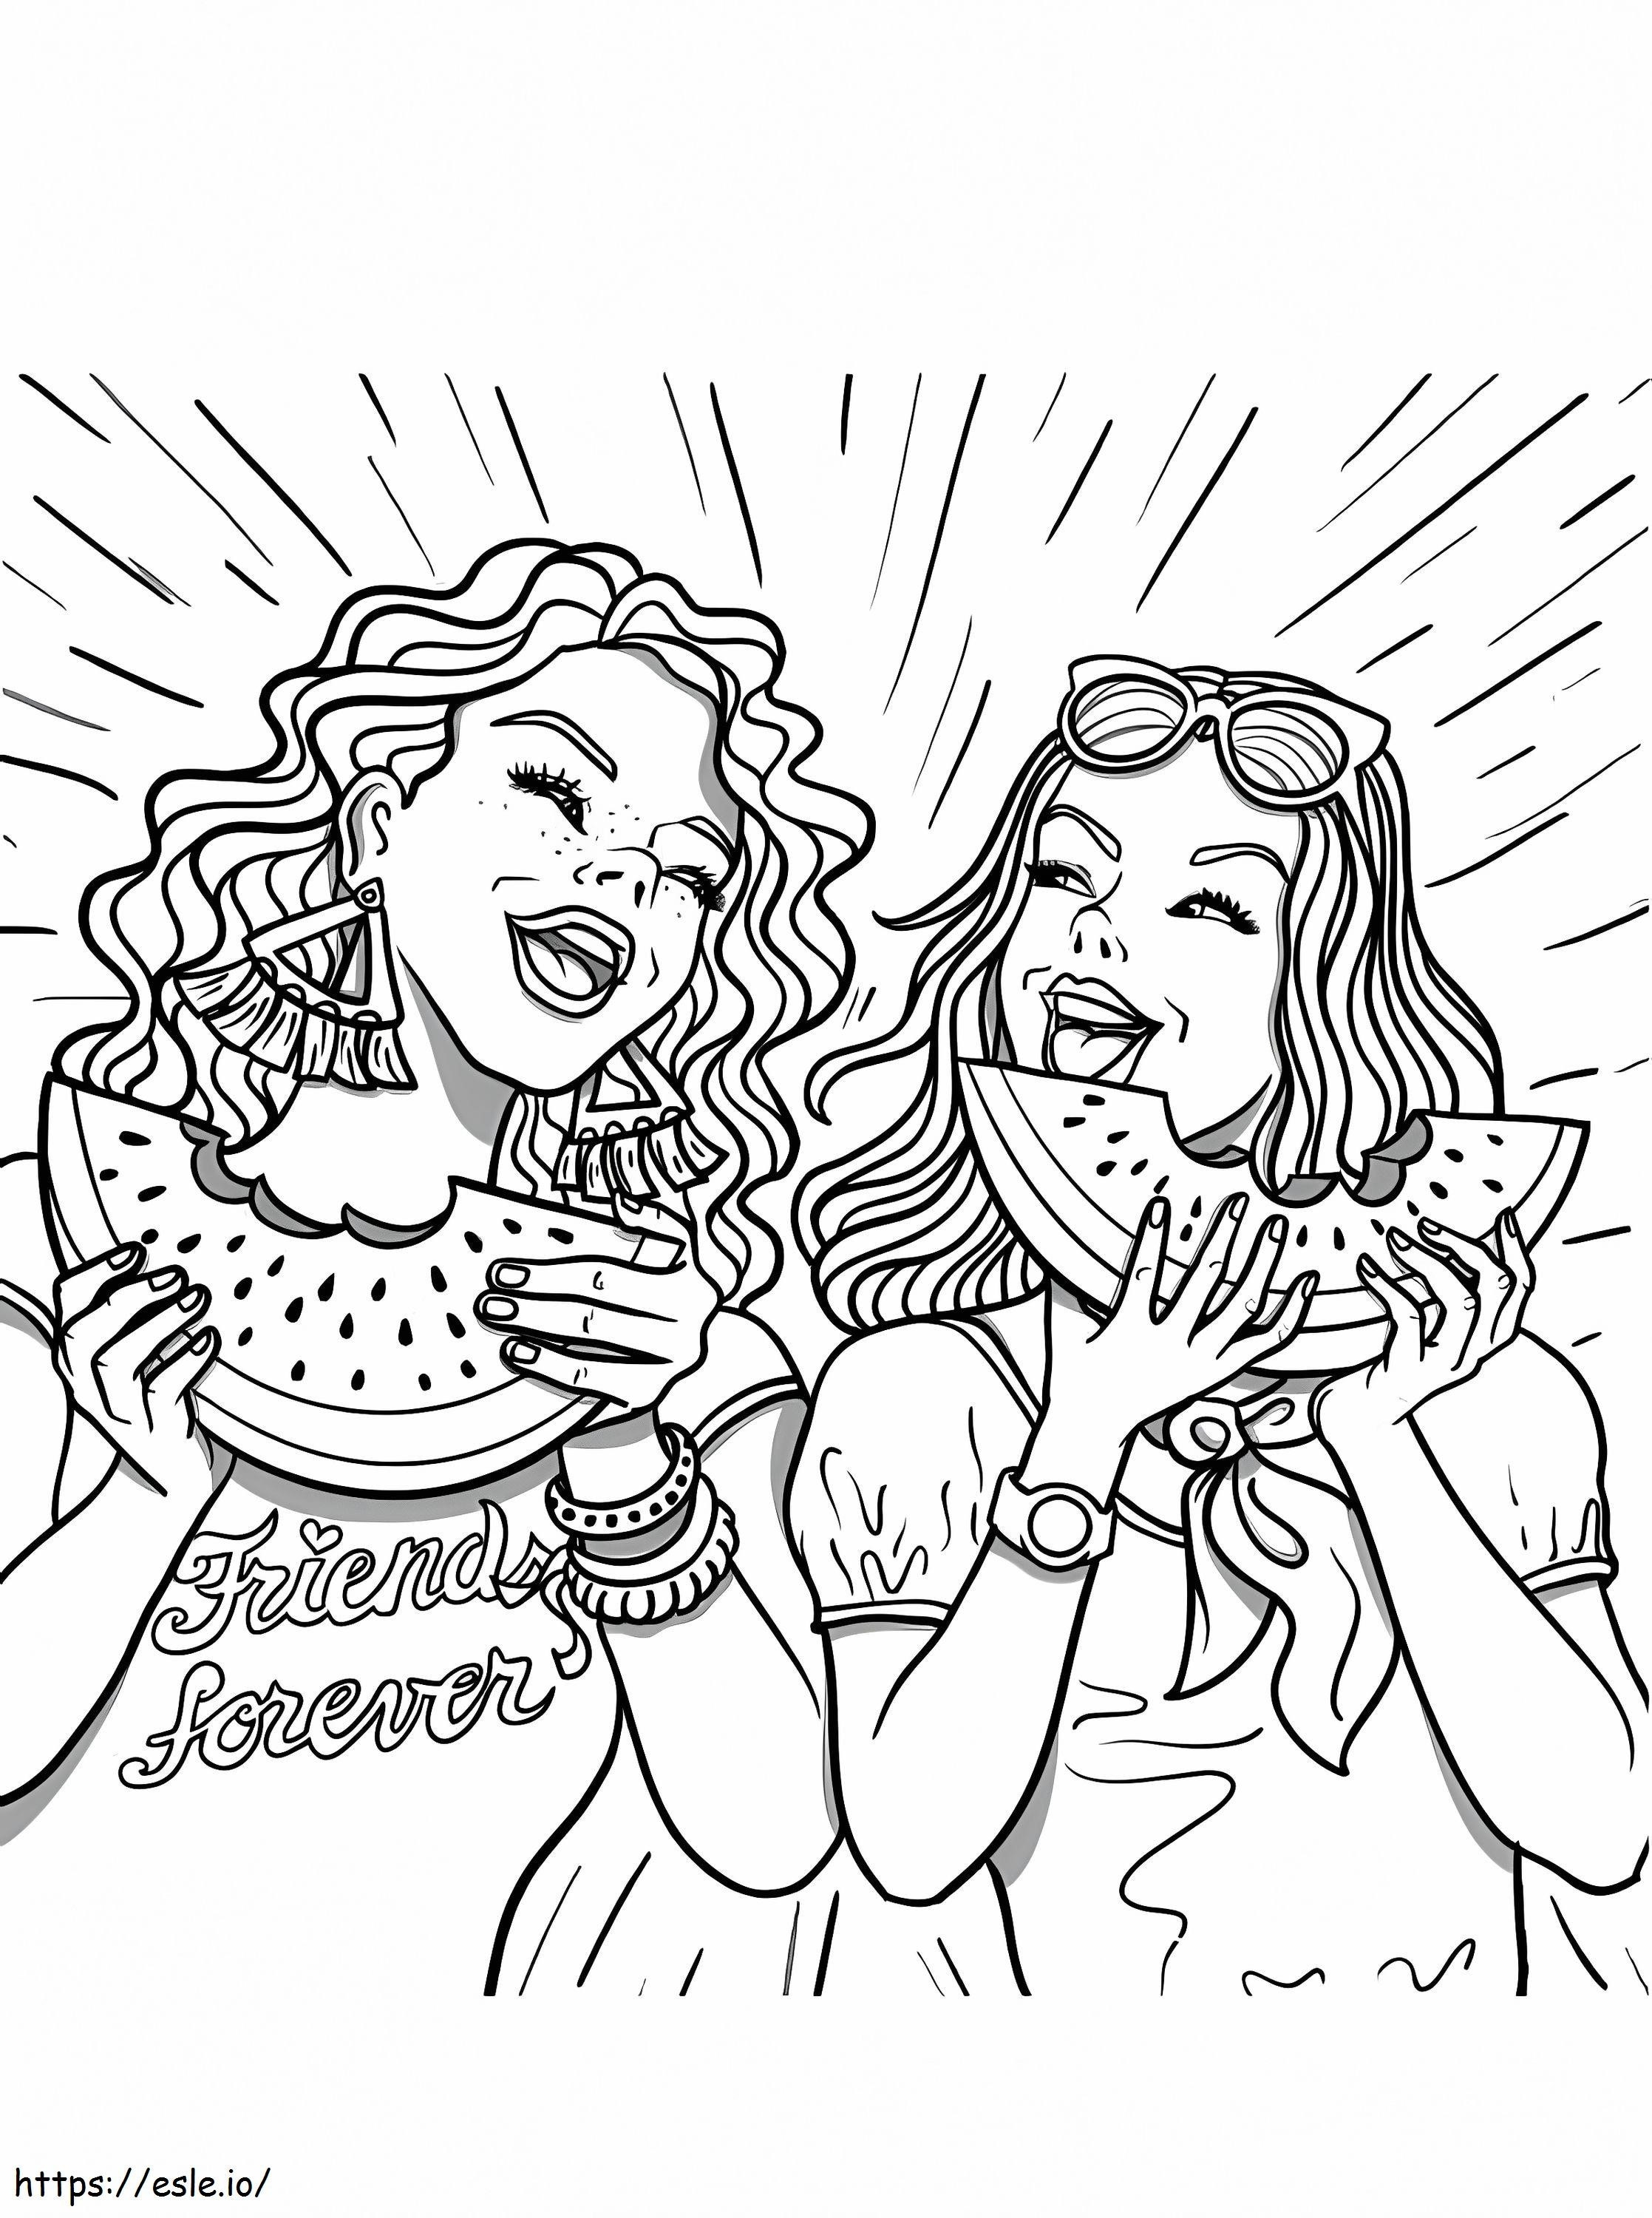 Funny Best Friends coloring page